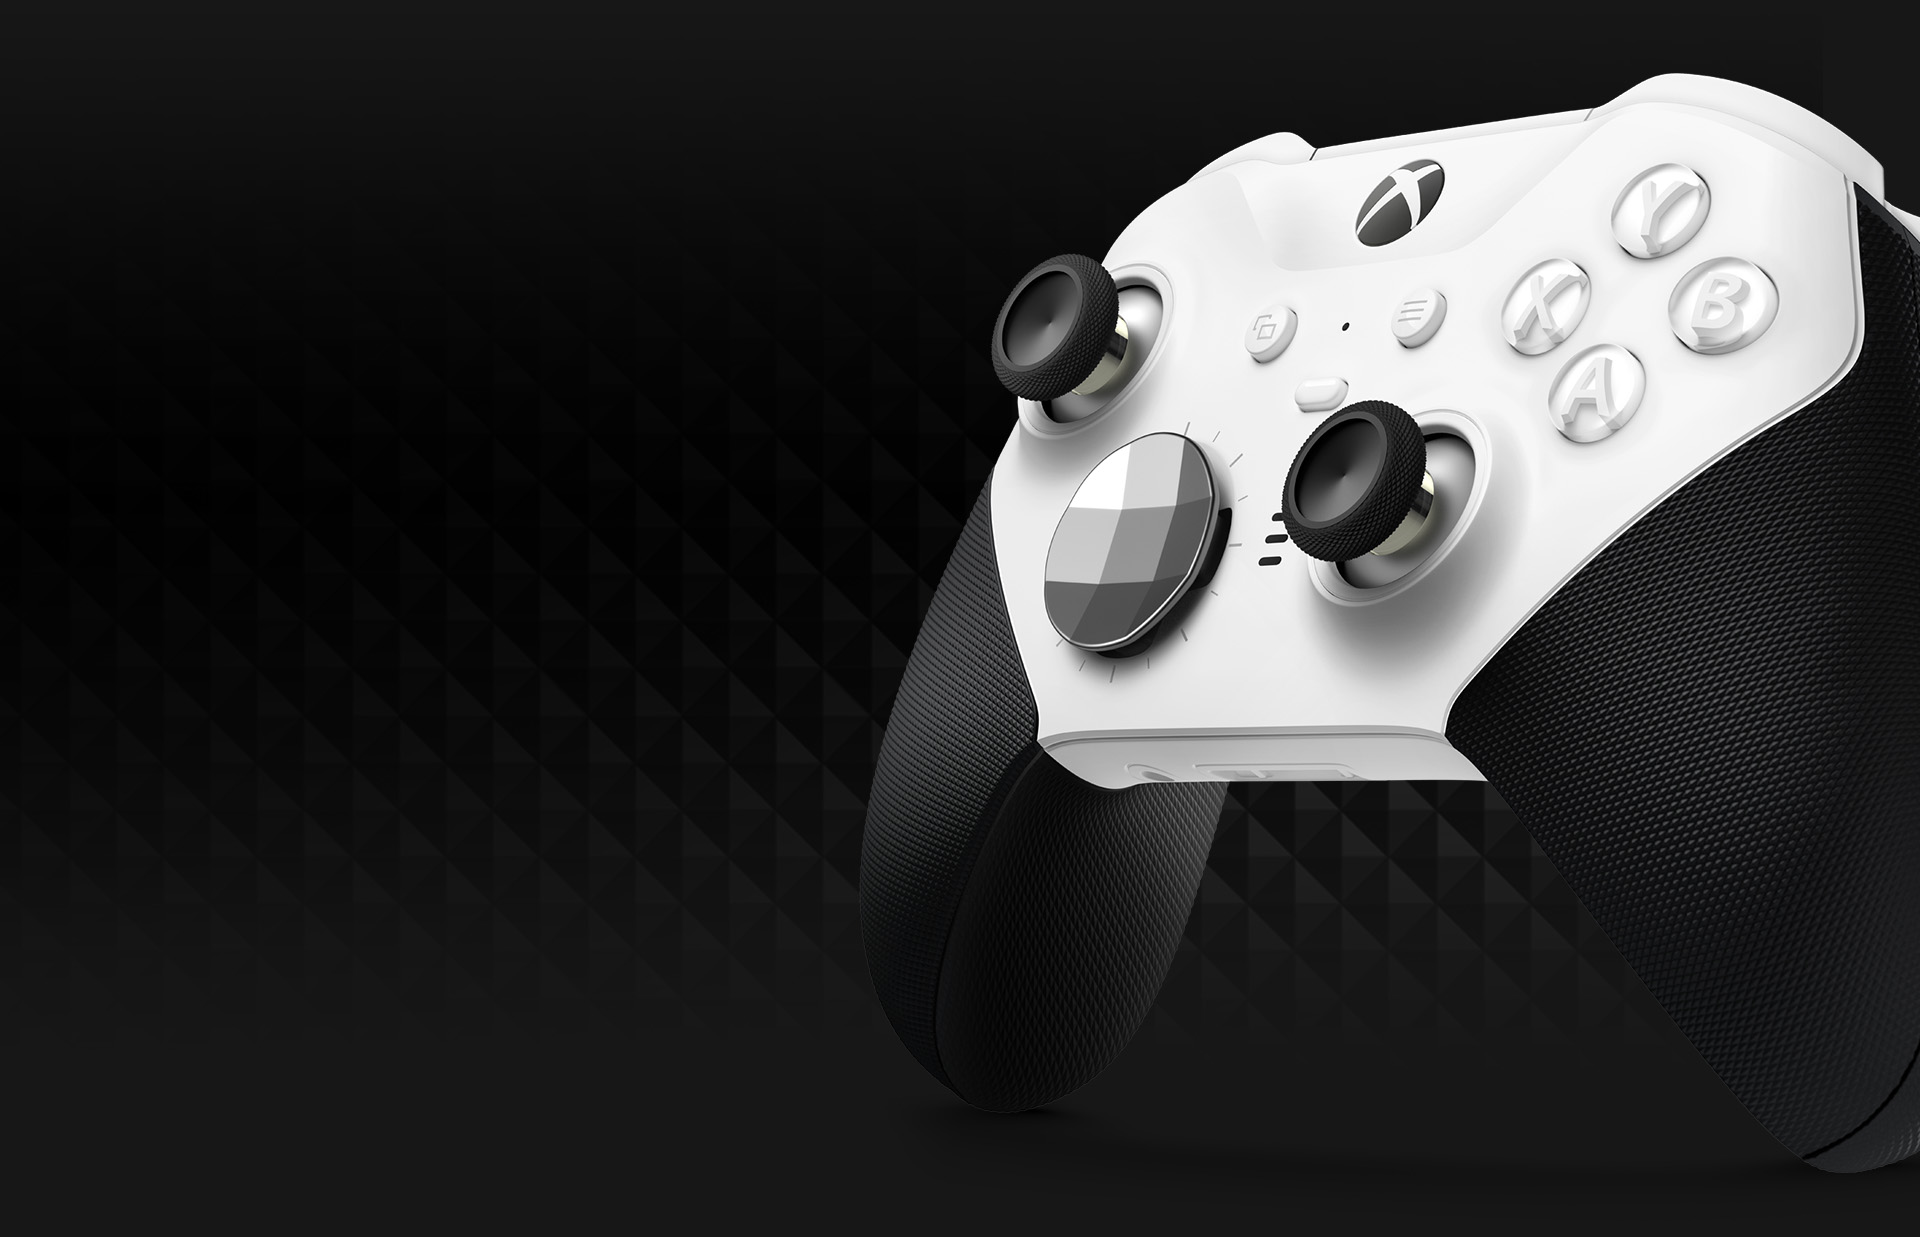 Left angle view of the Xbox Elite Wireless Controller Series 2 – Core (White) in front of a textured diamond grip background.